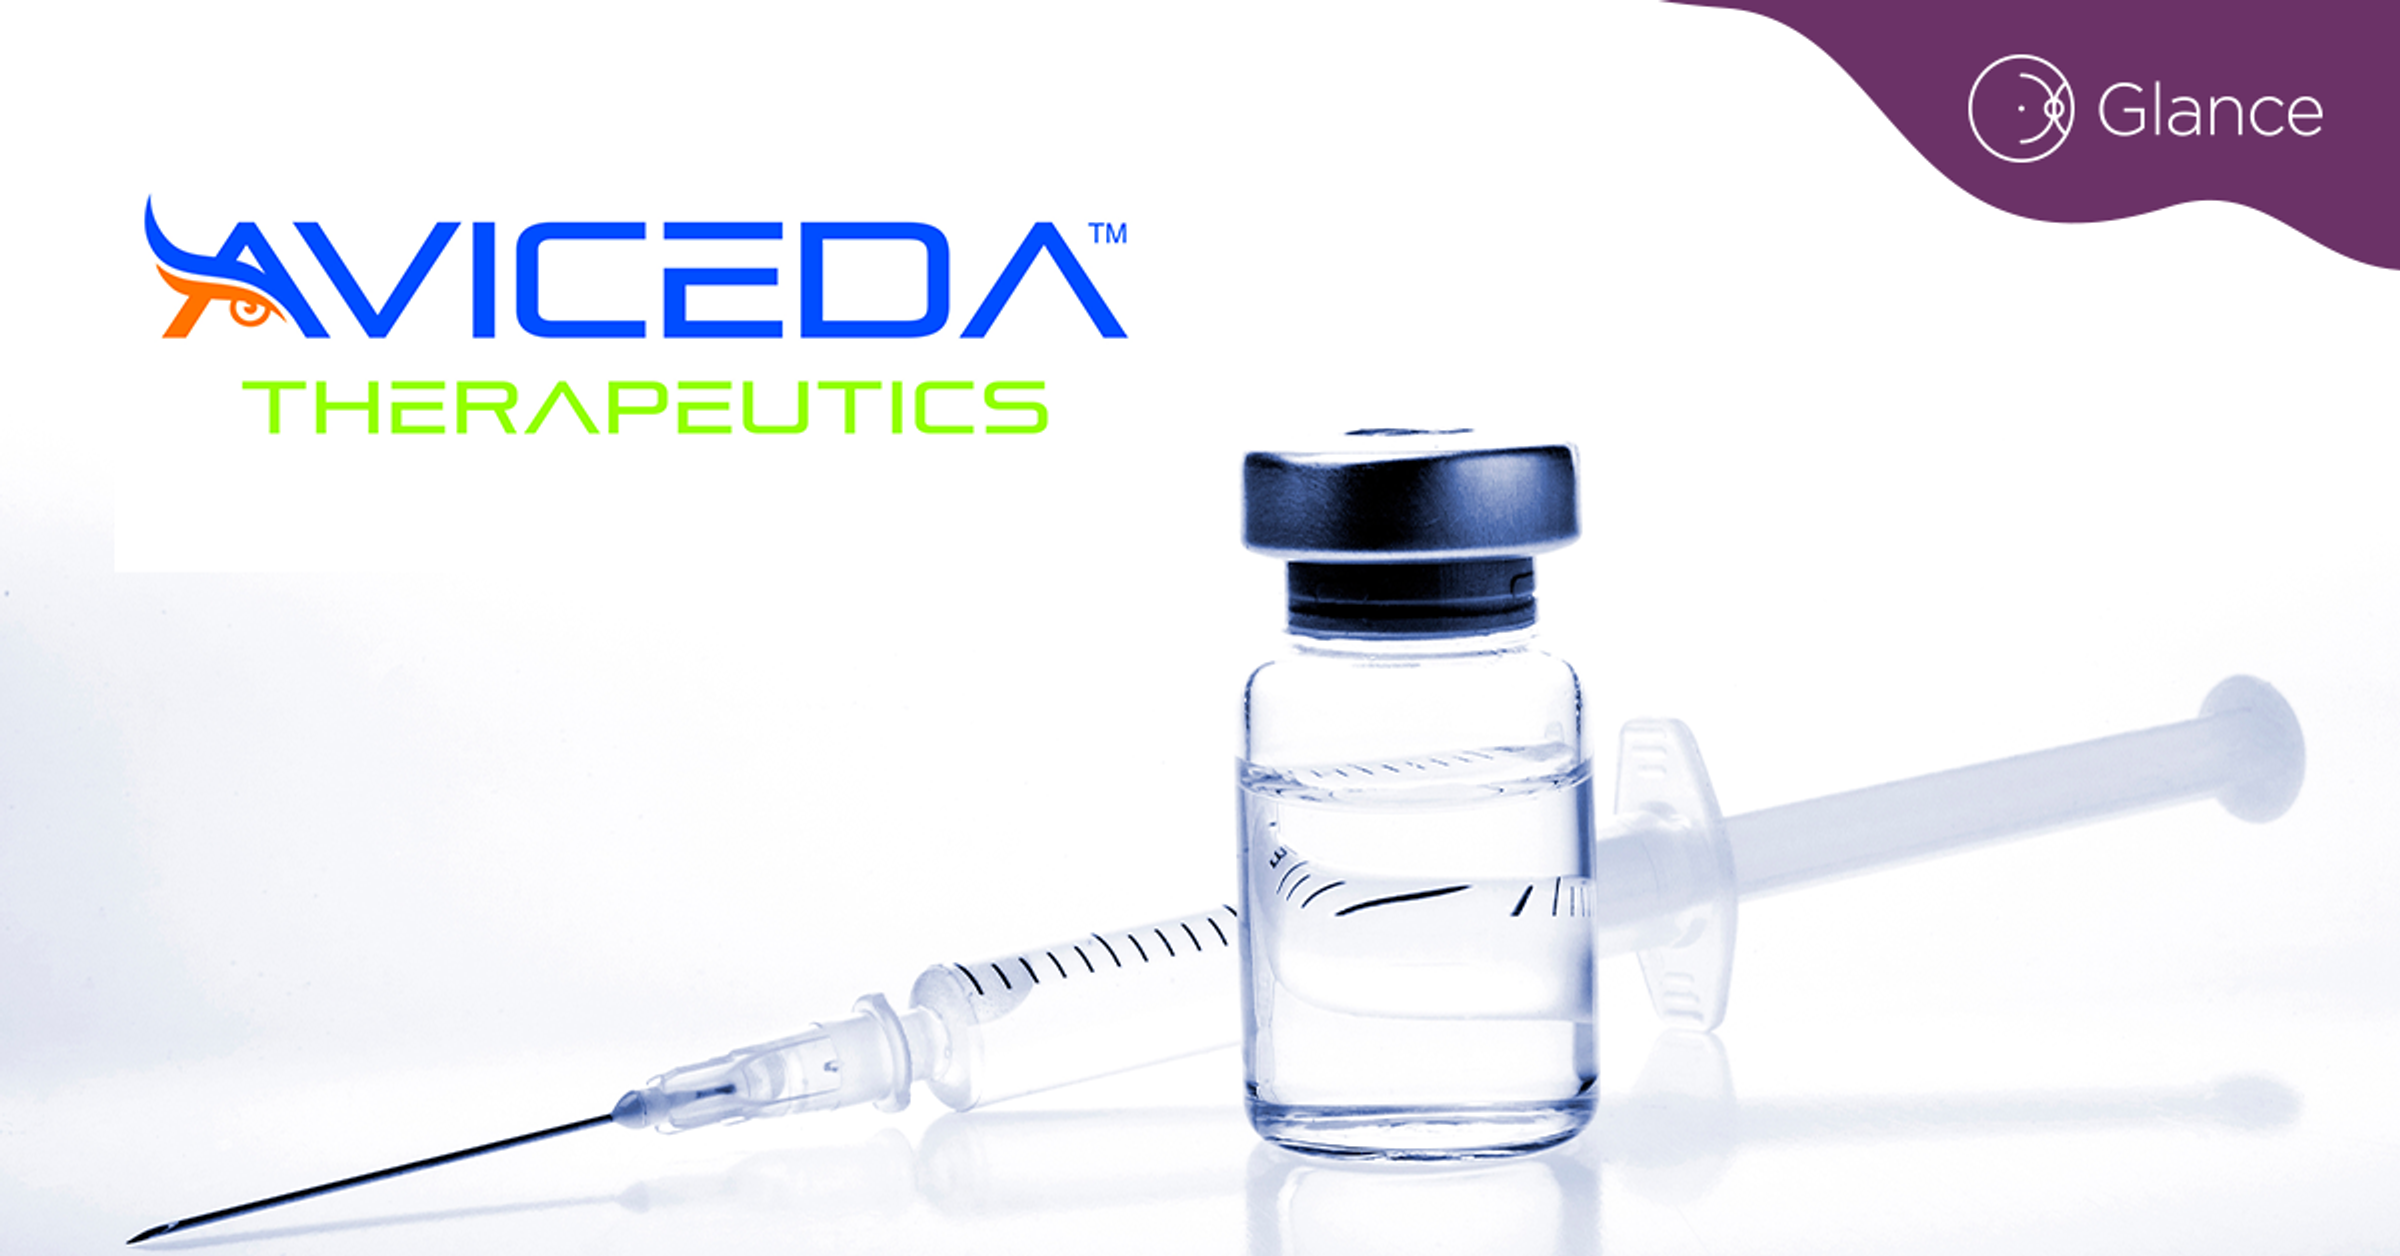 Aviceda submits IND for AVD-104 to treat GA secondary to AMD